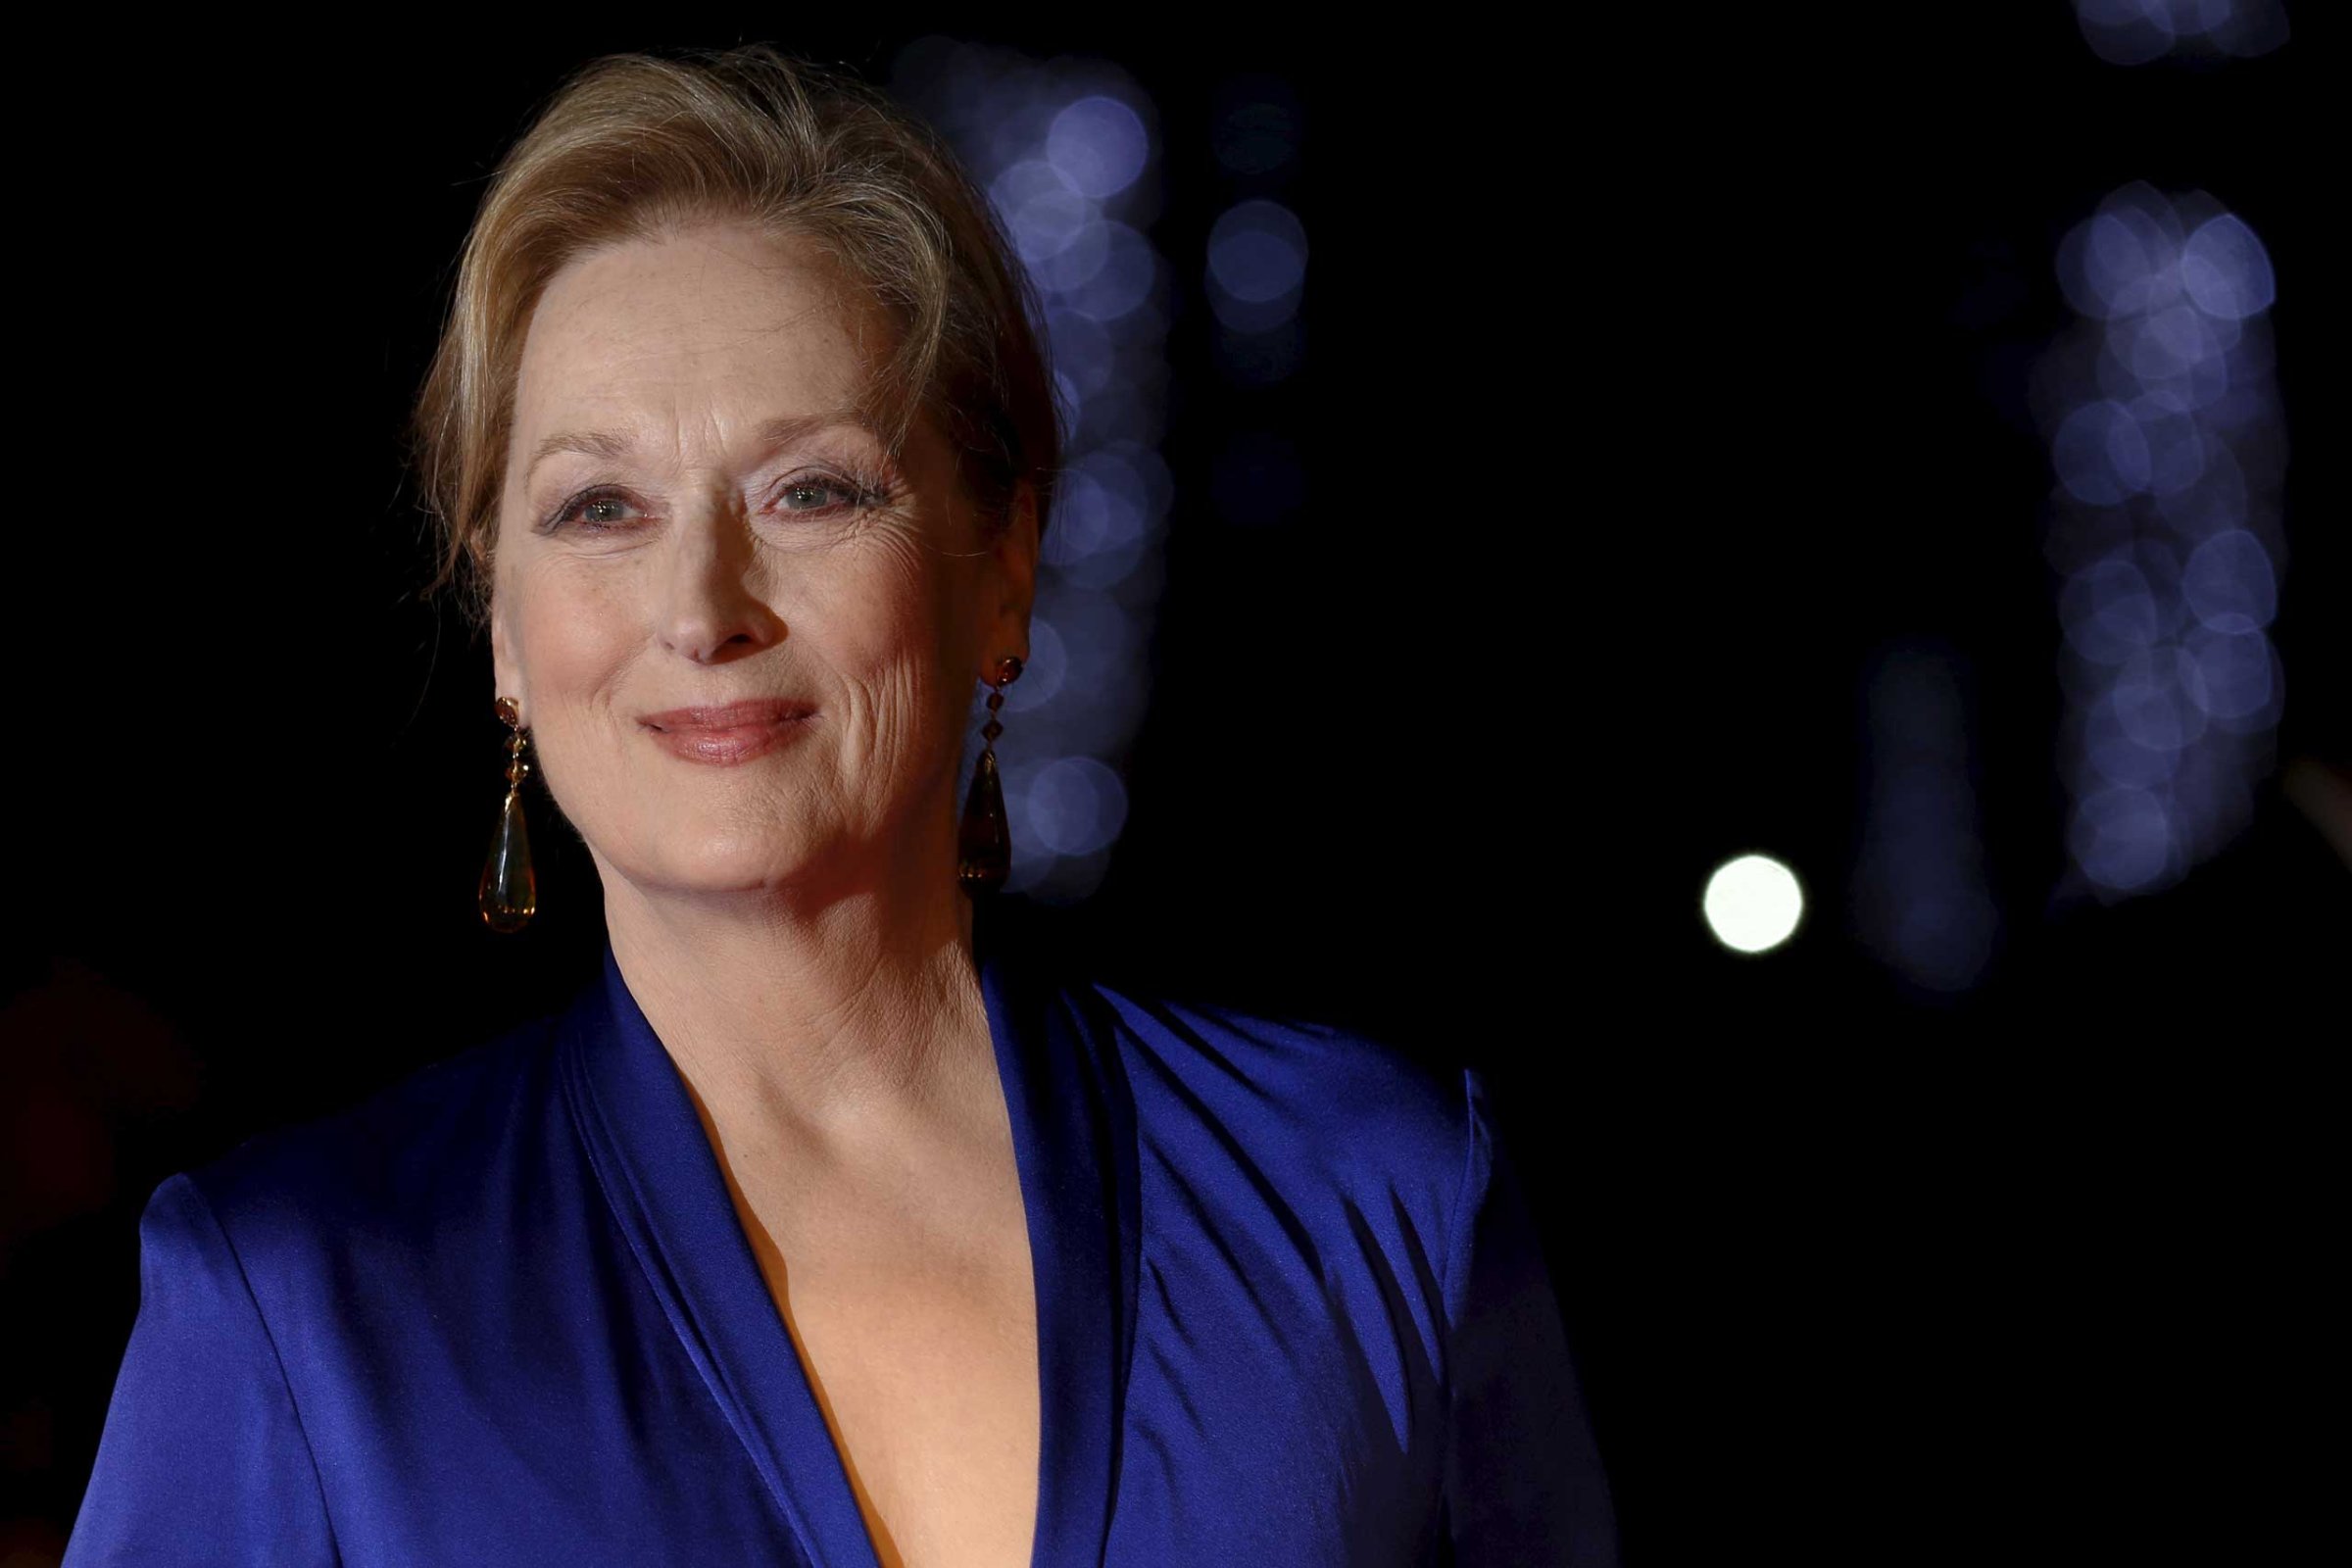 Actress Meryl Streep arrives for the Gala screening of the film "Suffragette" for the opening night of the British Film Institute (BFI) Film Festival at Leicester Square in London